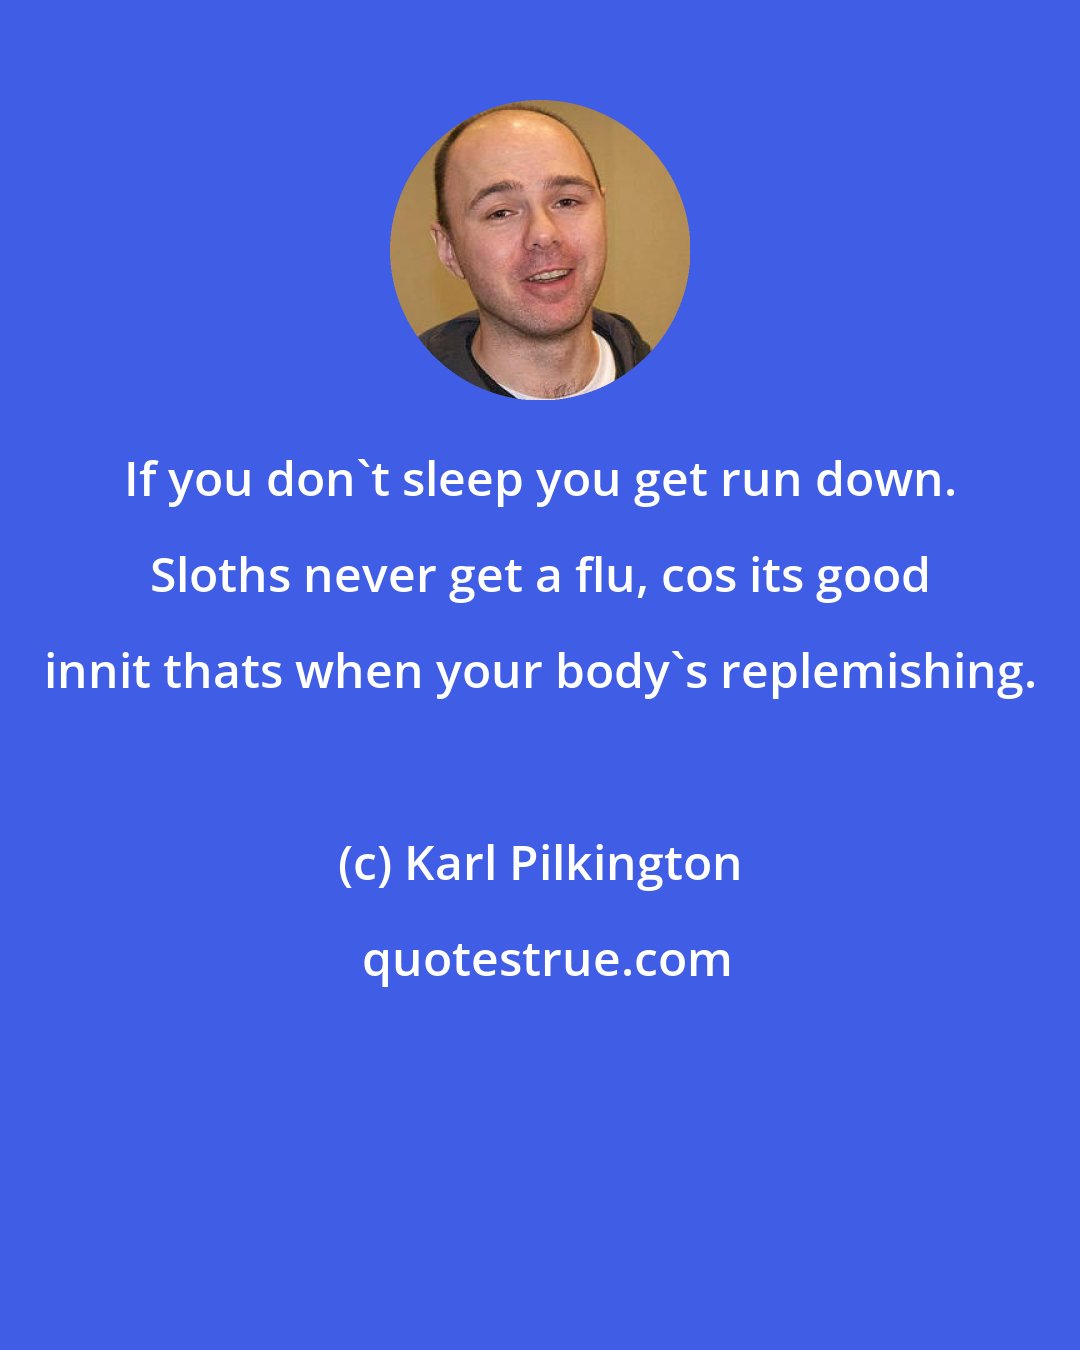 Karl Pilkington: If you don't sleep you get run down. Sloths never get a flu, cos its good innit thats when your body's replemishing.